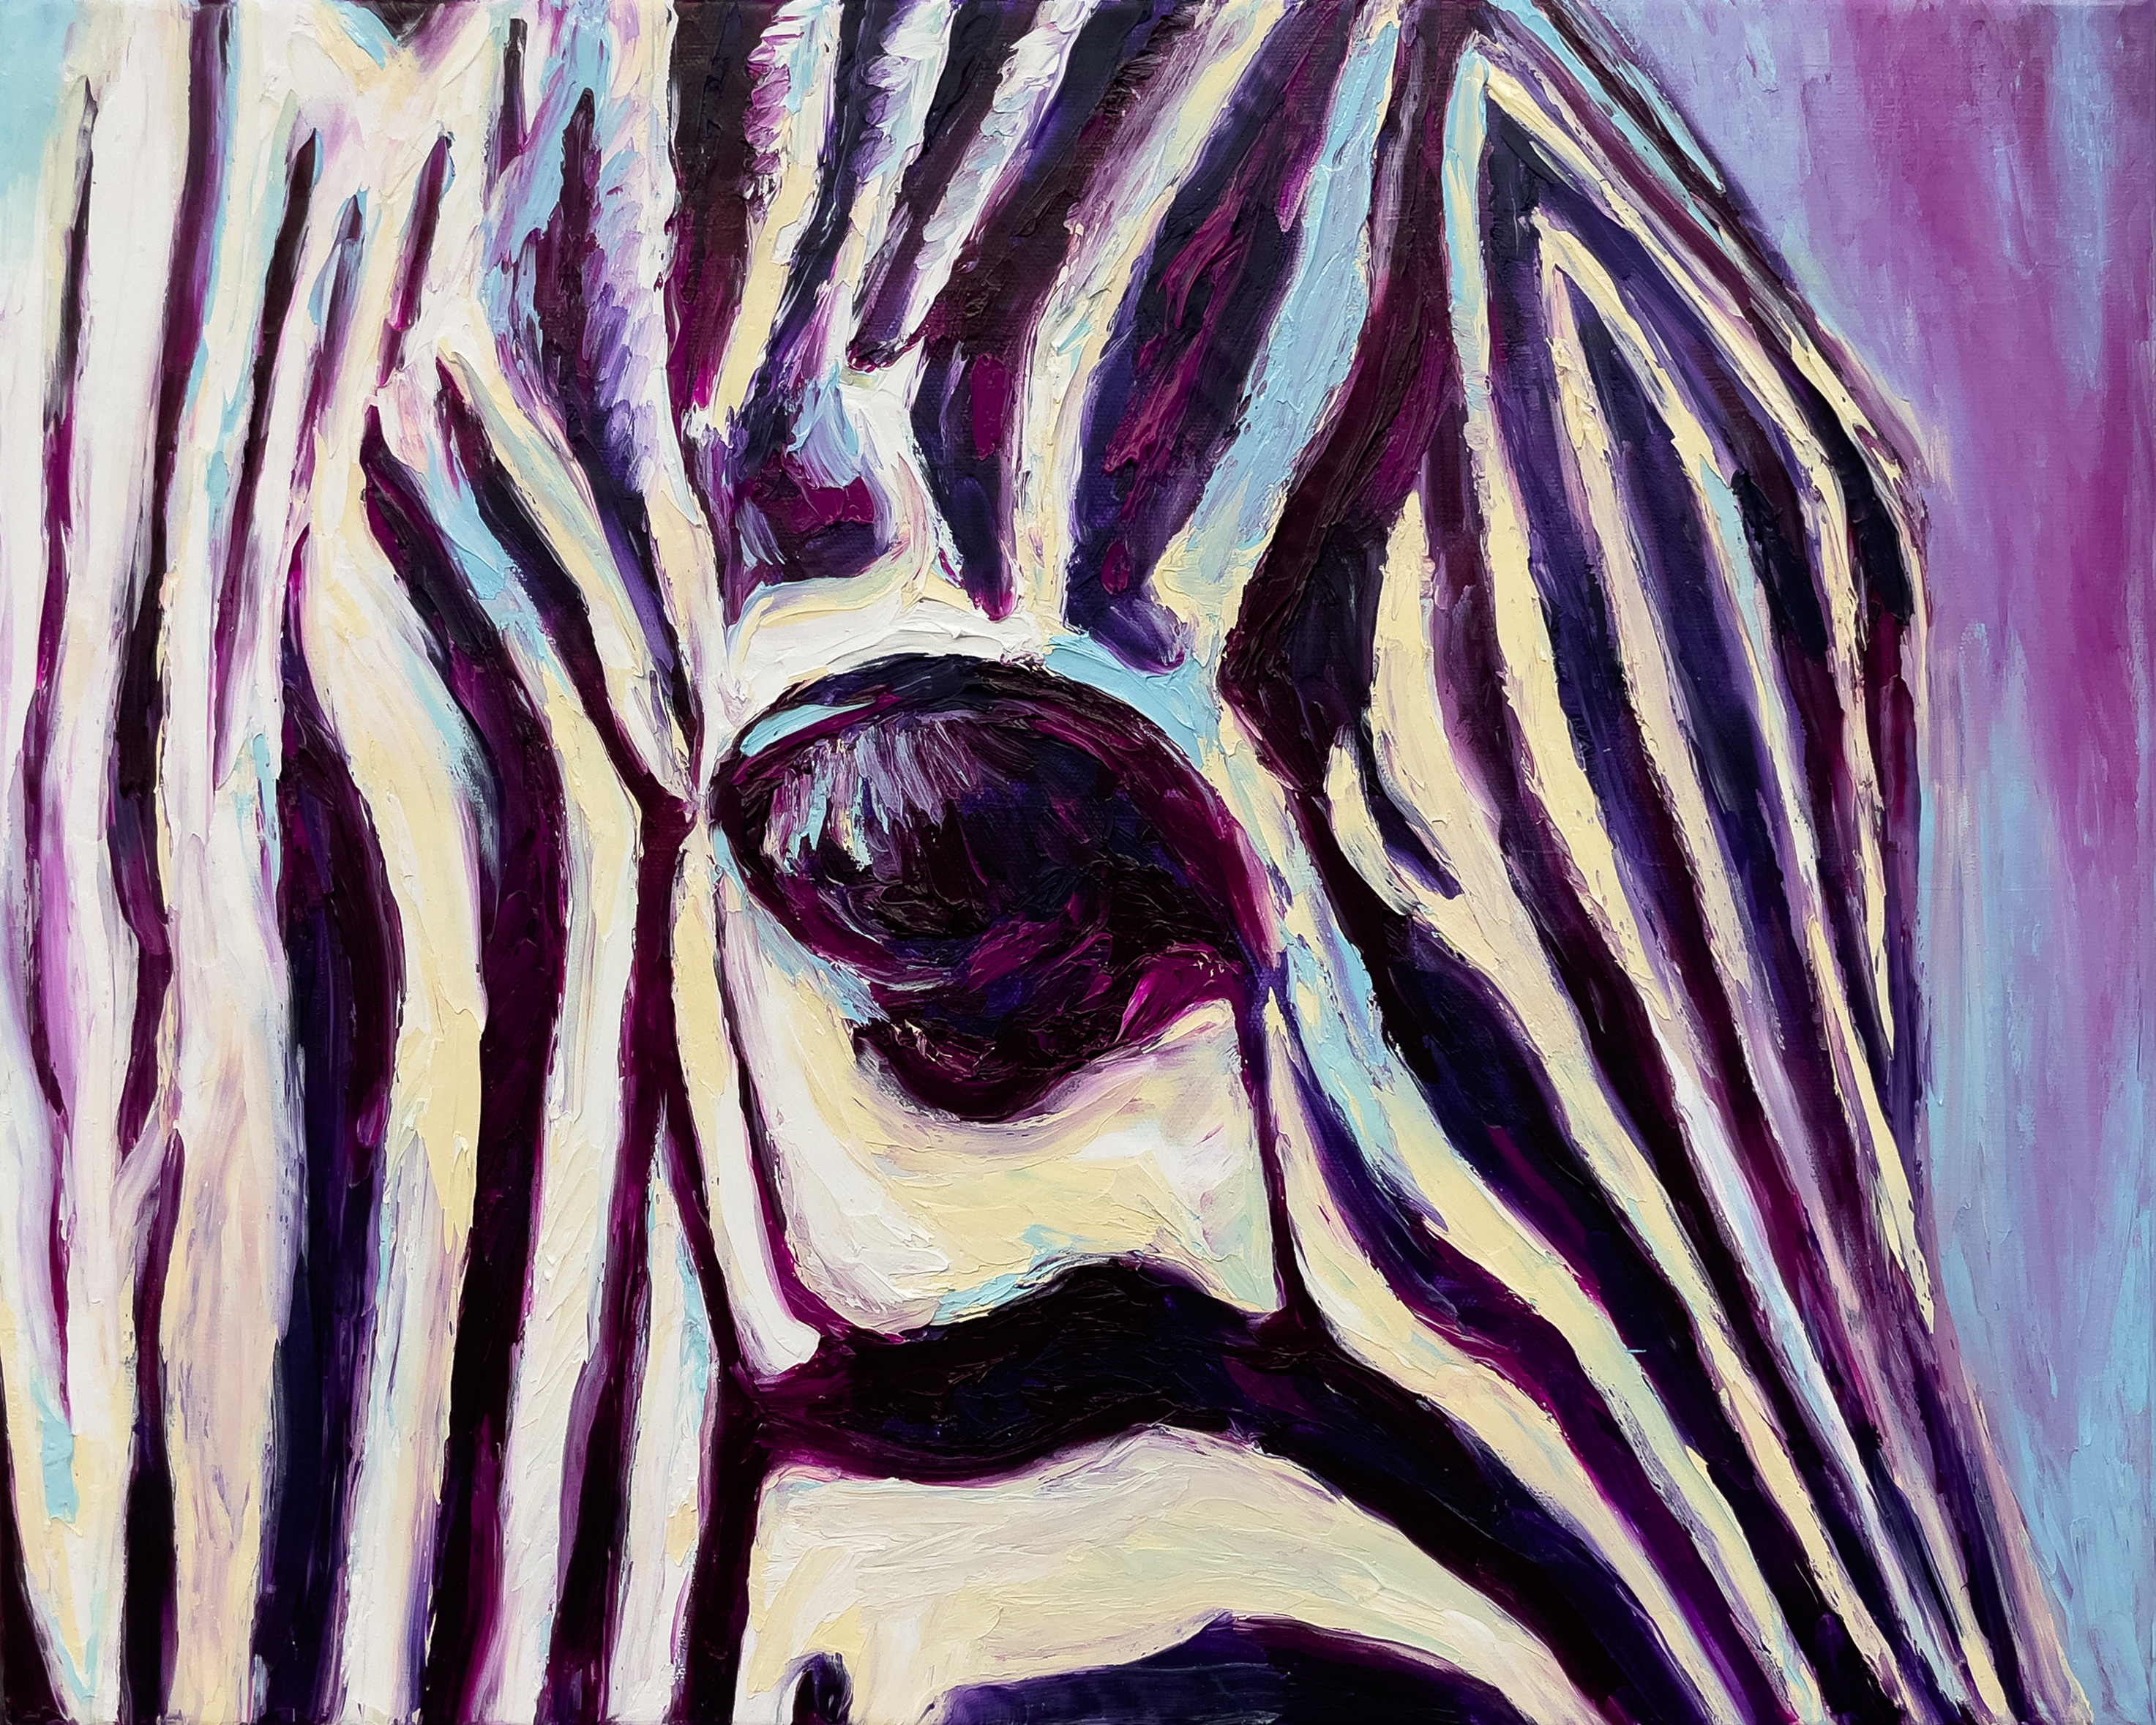 Kate wilson grevys zebra finger painted with oils on canvas 16x20inches 2022 g0blyp